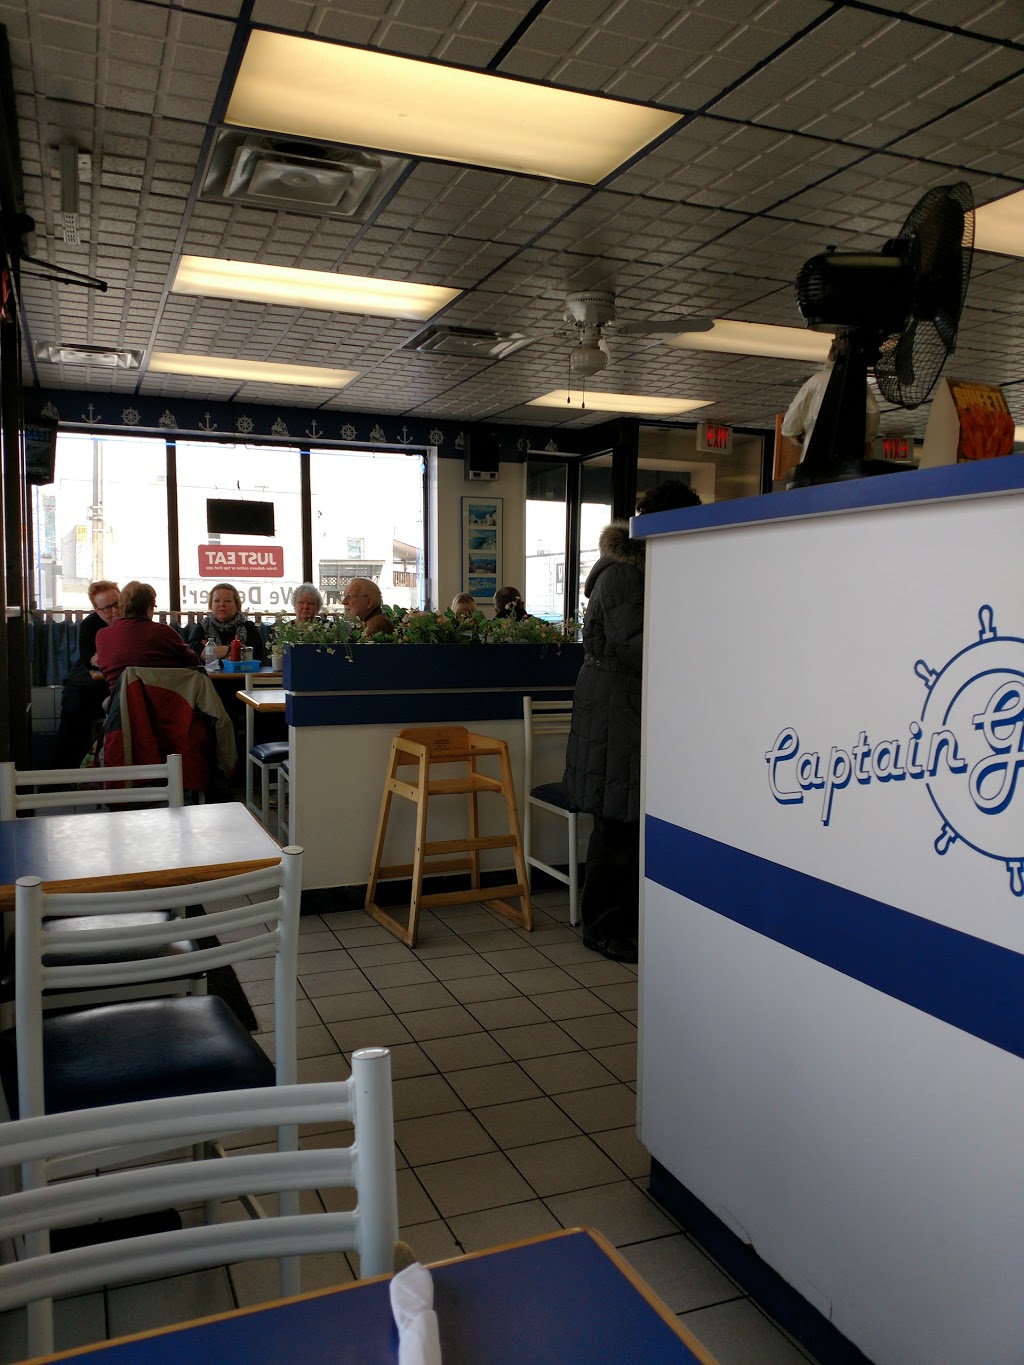 Captain Georges Fish & Chips | 201 Dundas St W, Whitby, ON L1N 2M4, Canada | Phone: (905) 666-9632